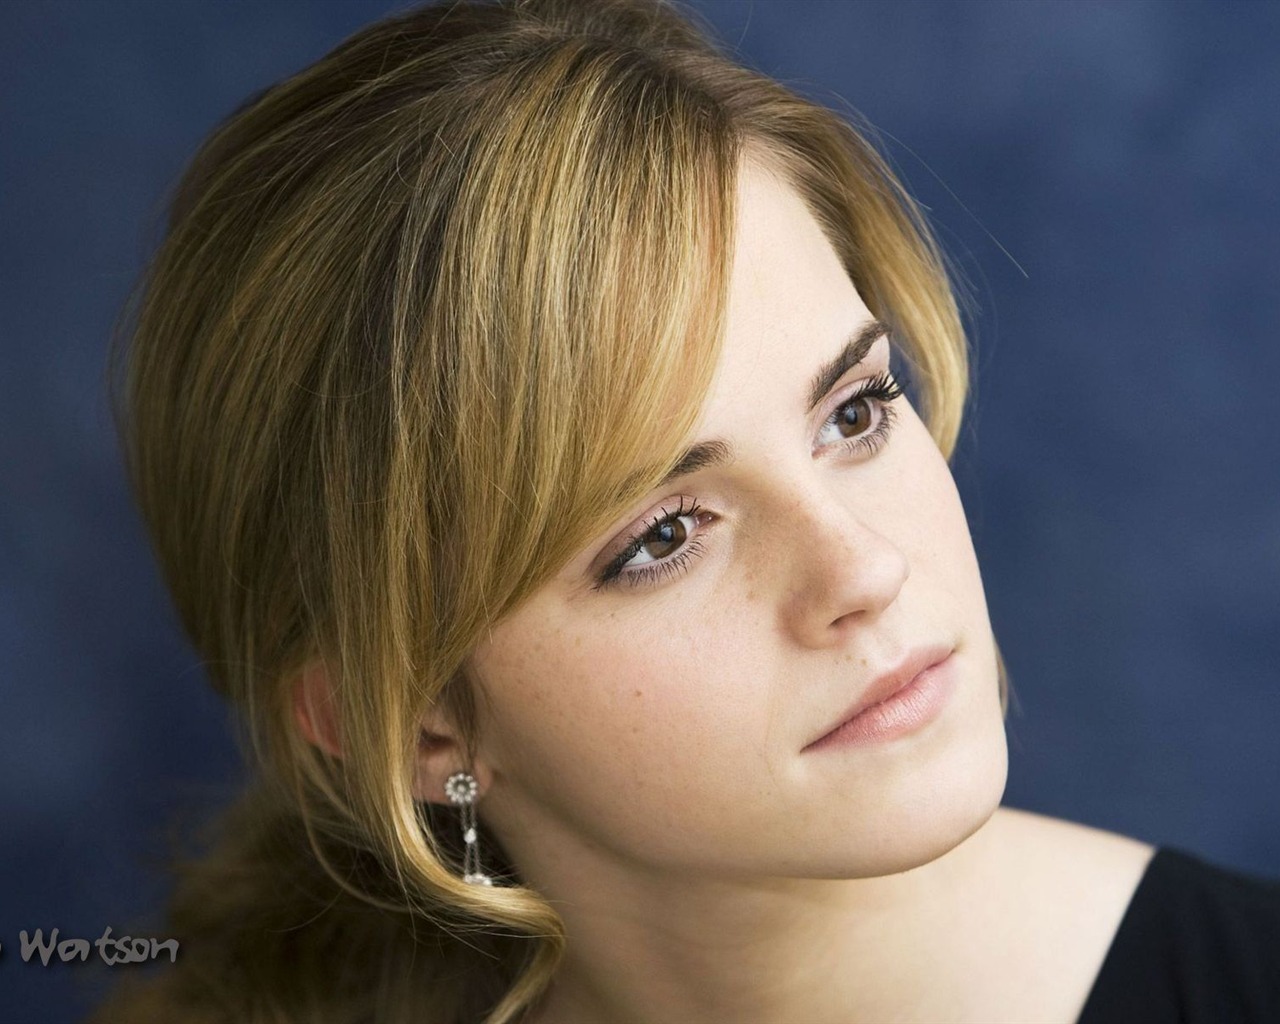 Emma Watson #012 - 1280x1024 Wallpapers Pictures Photos Images